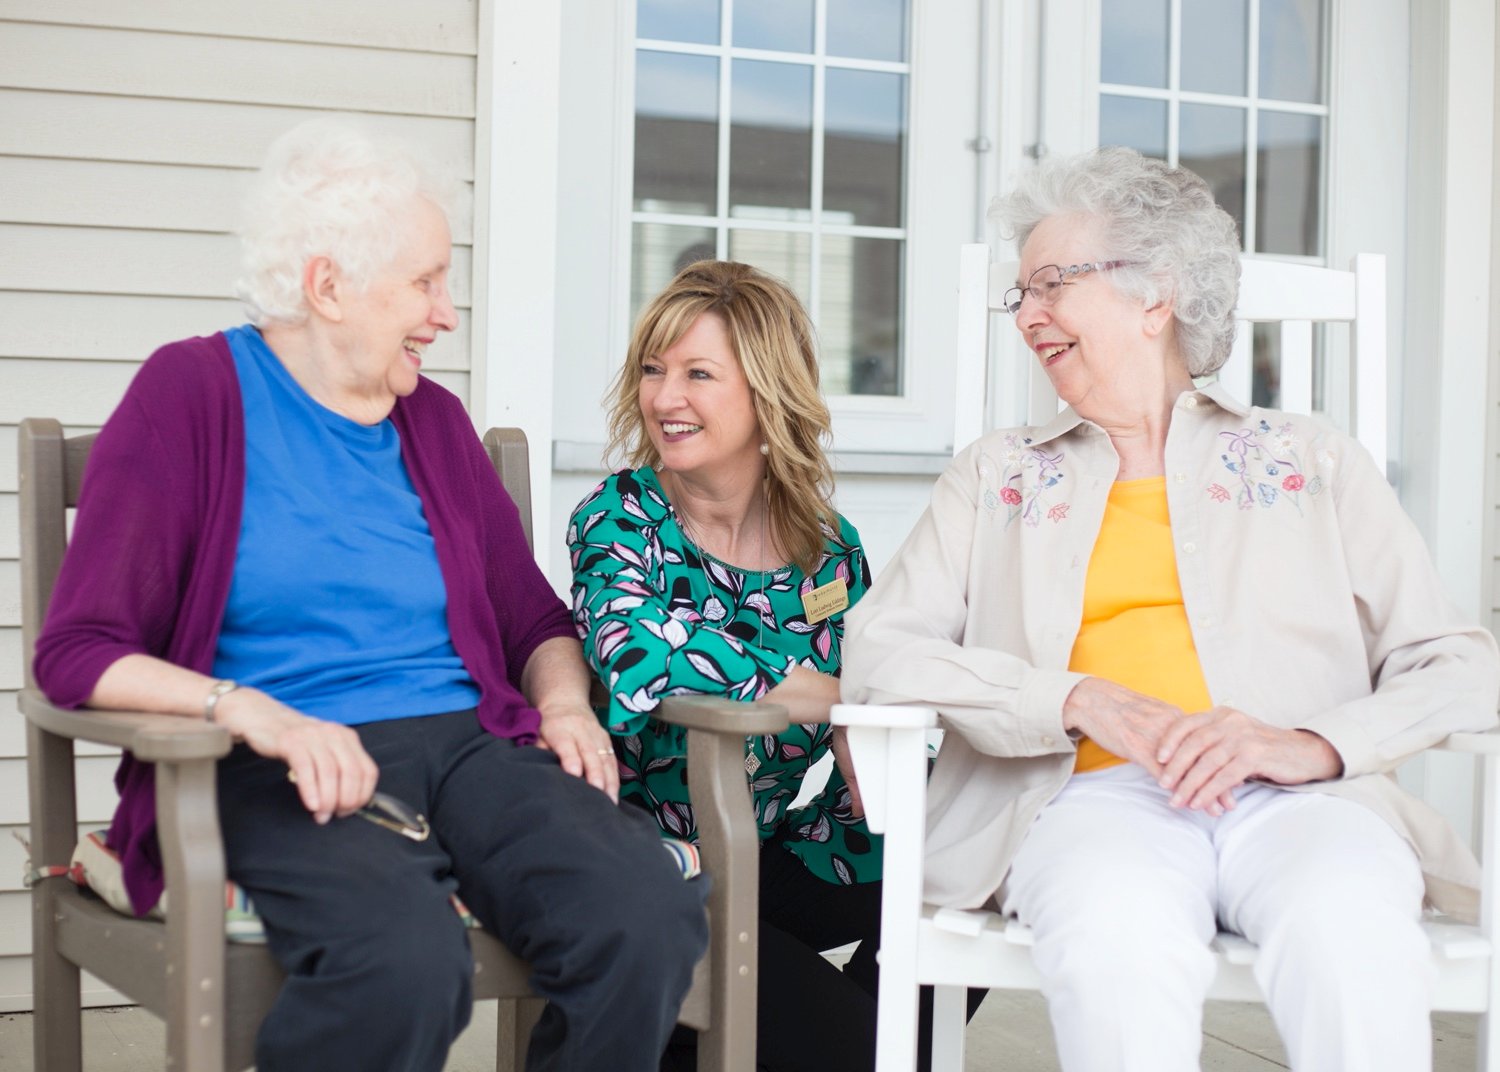 A staff member socializing on the patio with two senior women